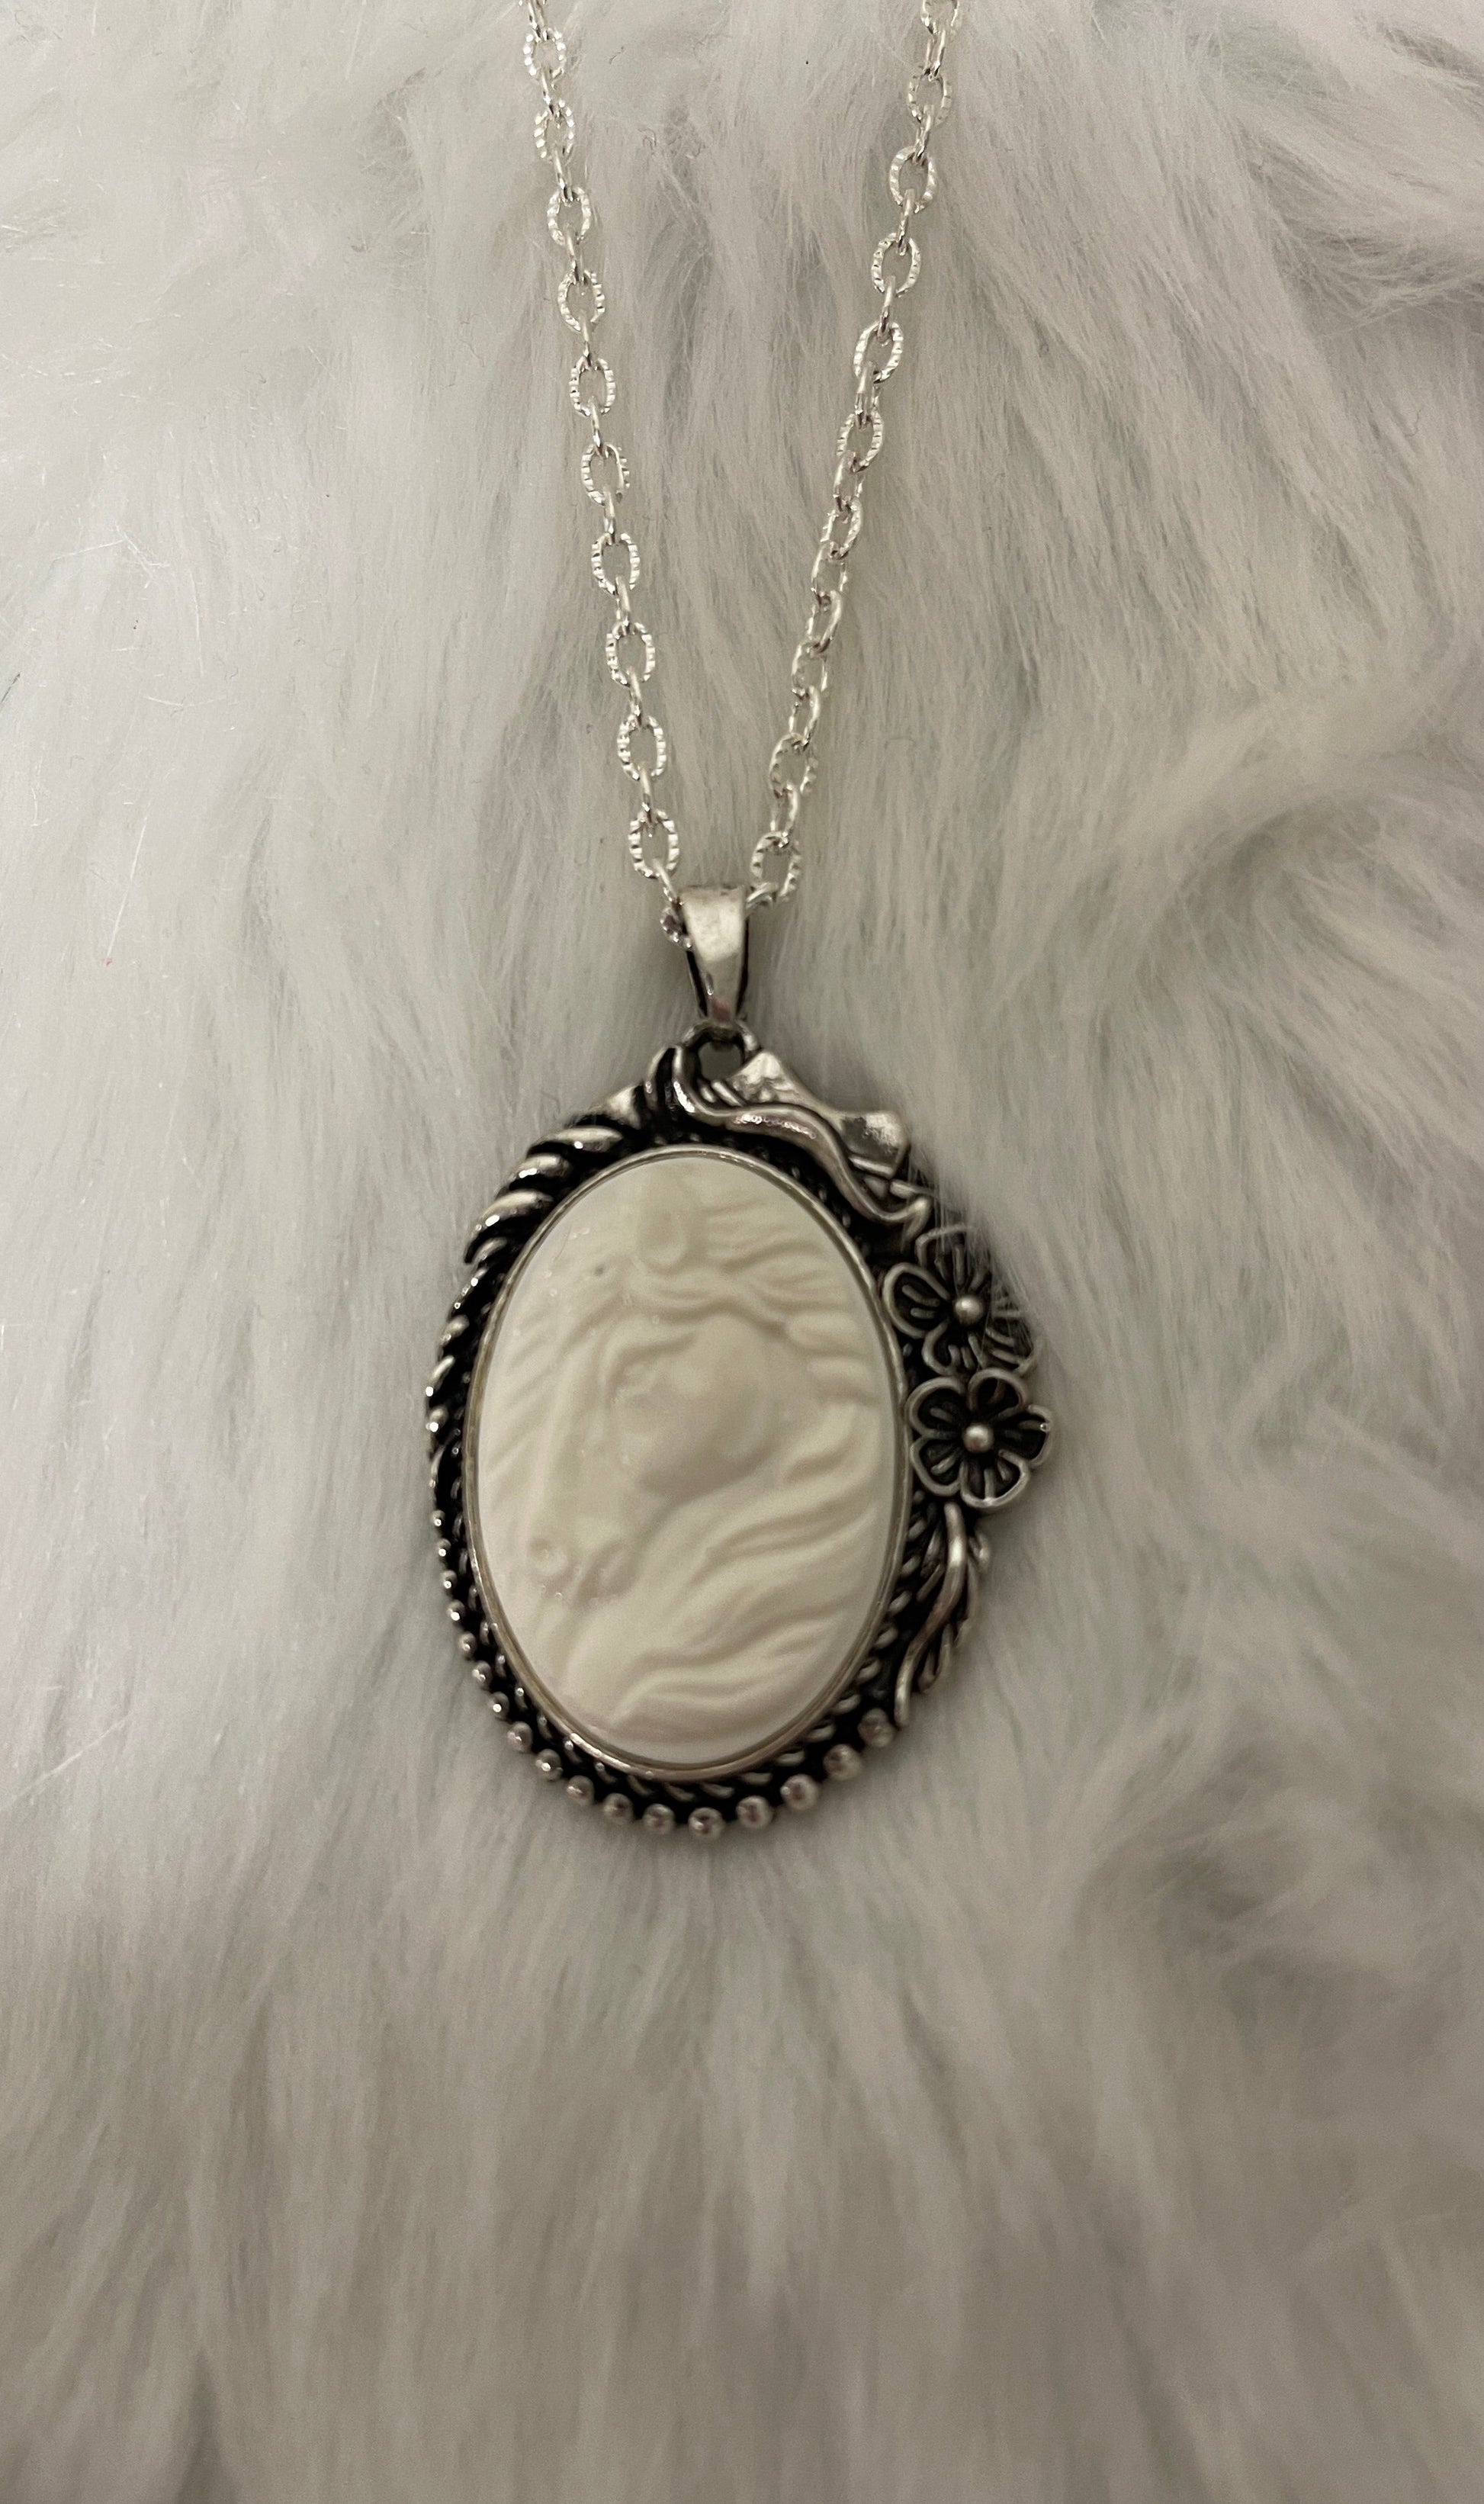 Horse Cameo Pendant on a Silver chain NecklacePink tiful of LOVE